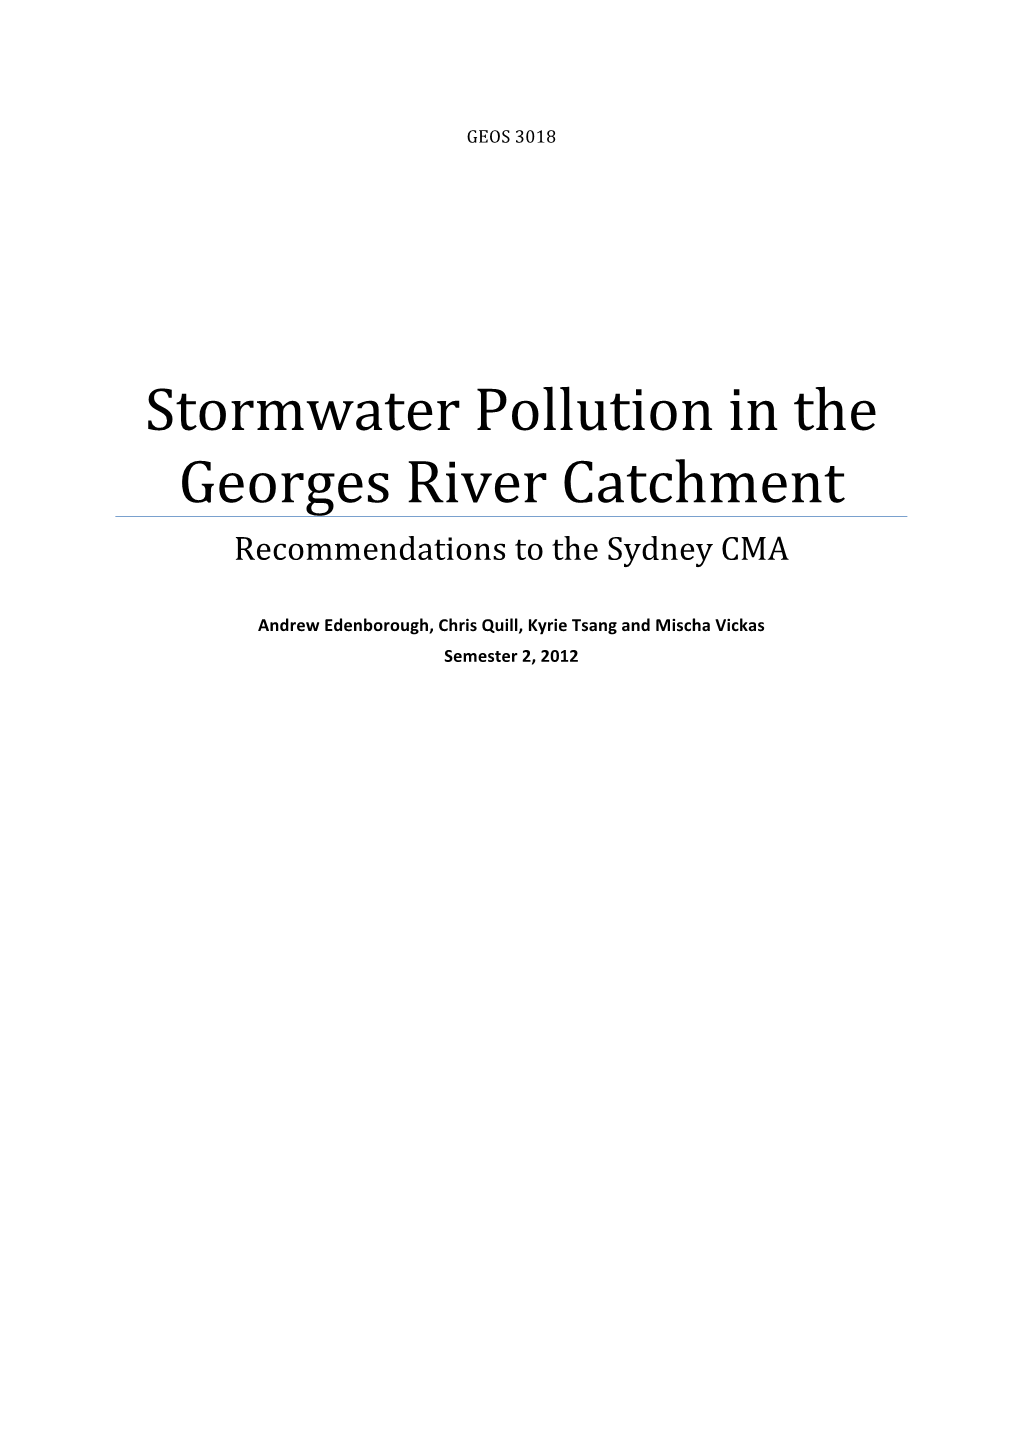 Stormwater Pollution in the Georges River Catchment Recommendations to the Sydney CMA